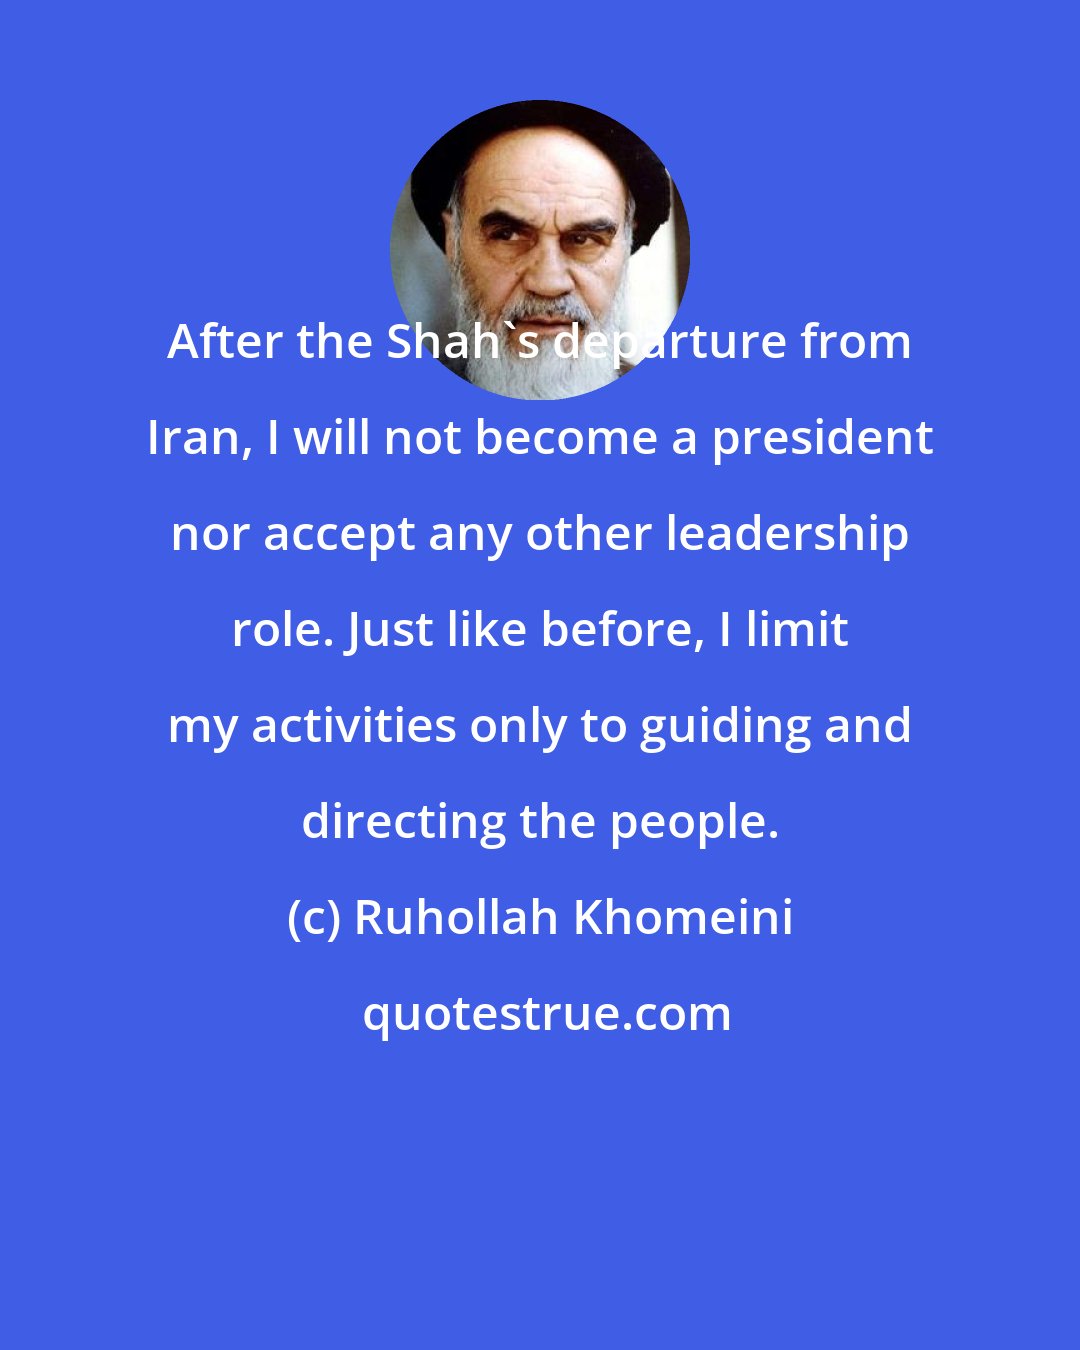 Ruhollah Khomeini: After the Shah's departure from Iran, I will not become a president nor accept any other leadership role. Just like before, I limit my activities only to guiding and directing the people.